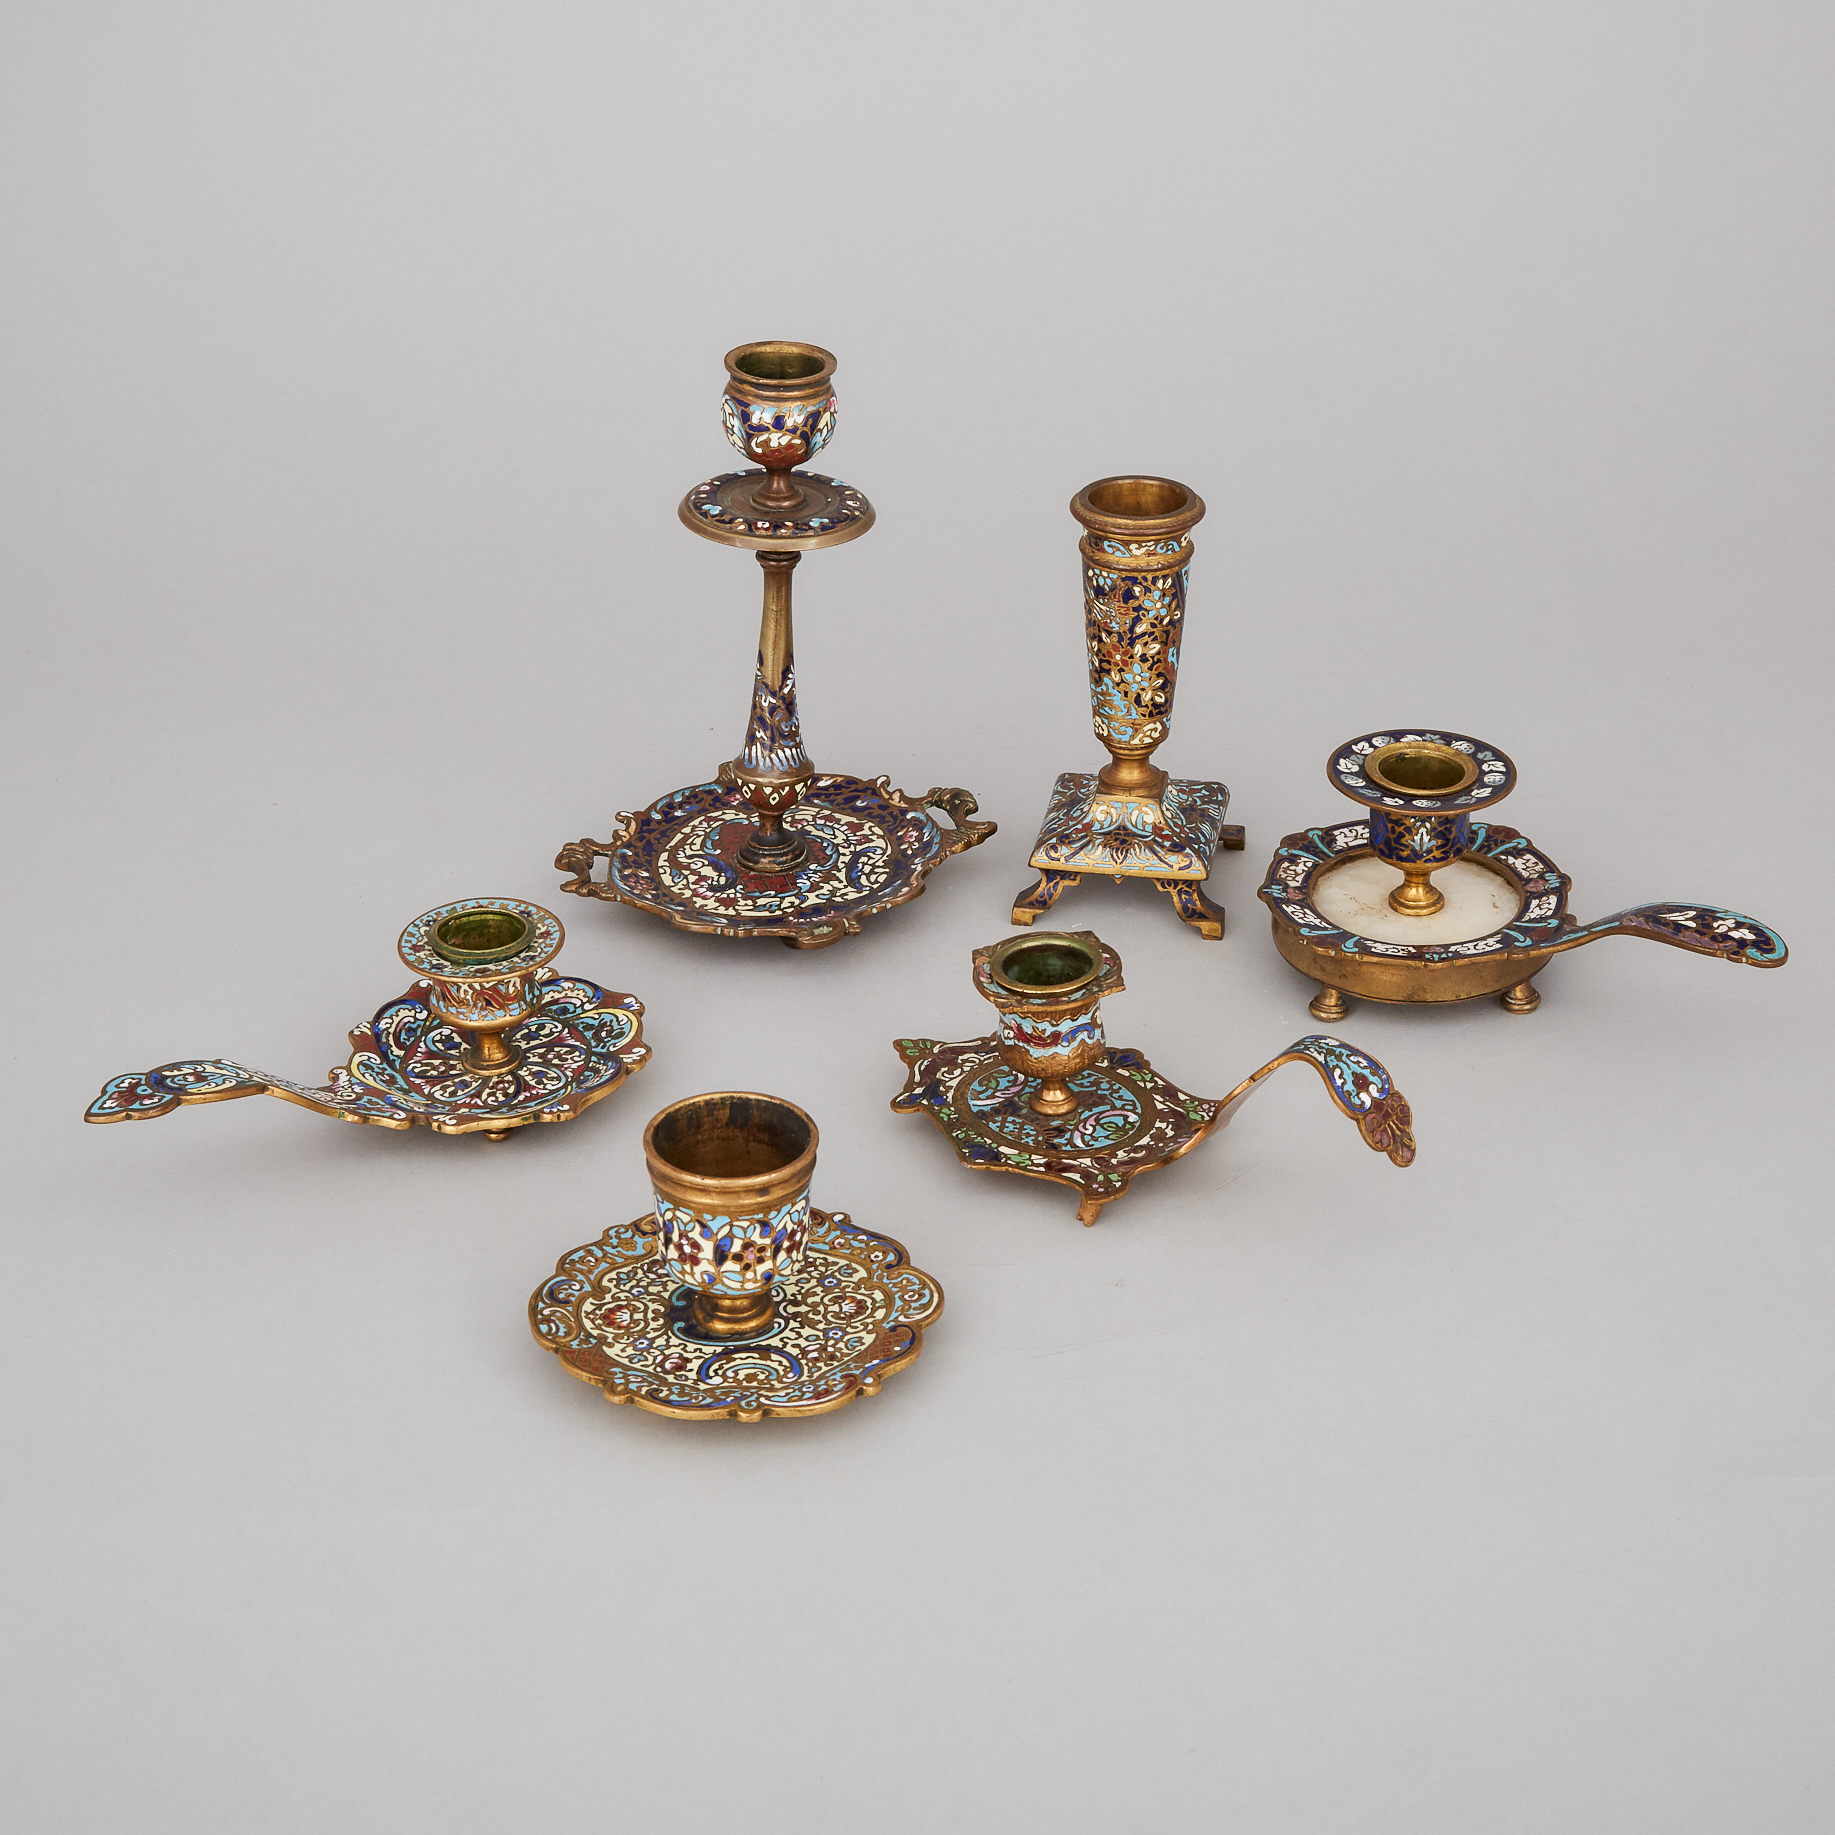 Collection of French Champlevé Enamel Gilt Bronze Desk Accessories, 19th century